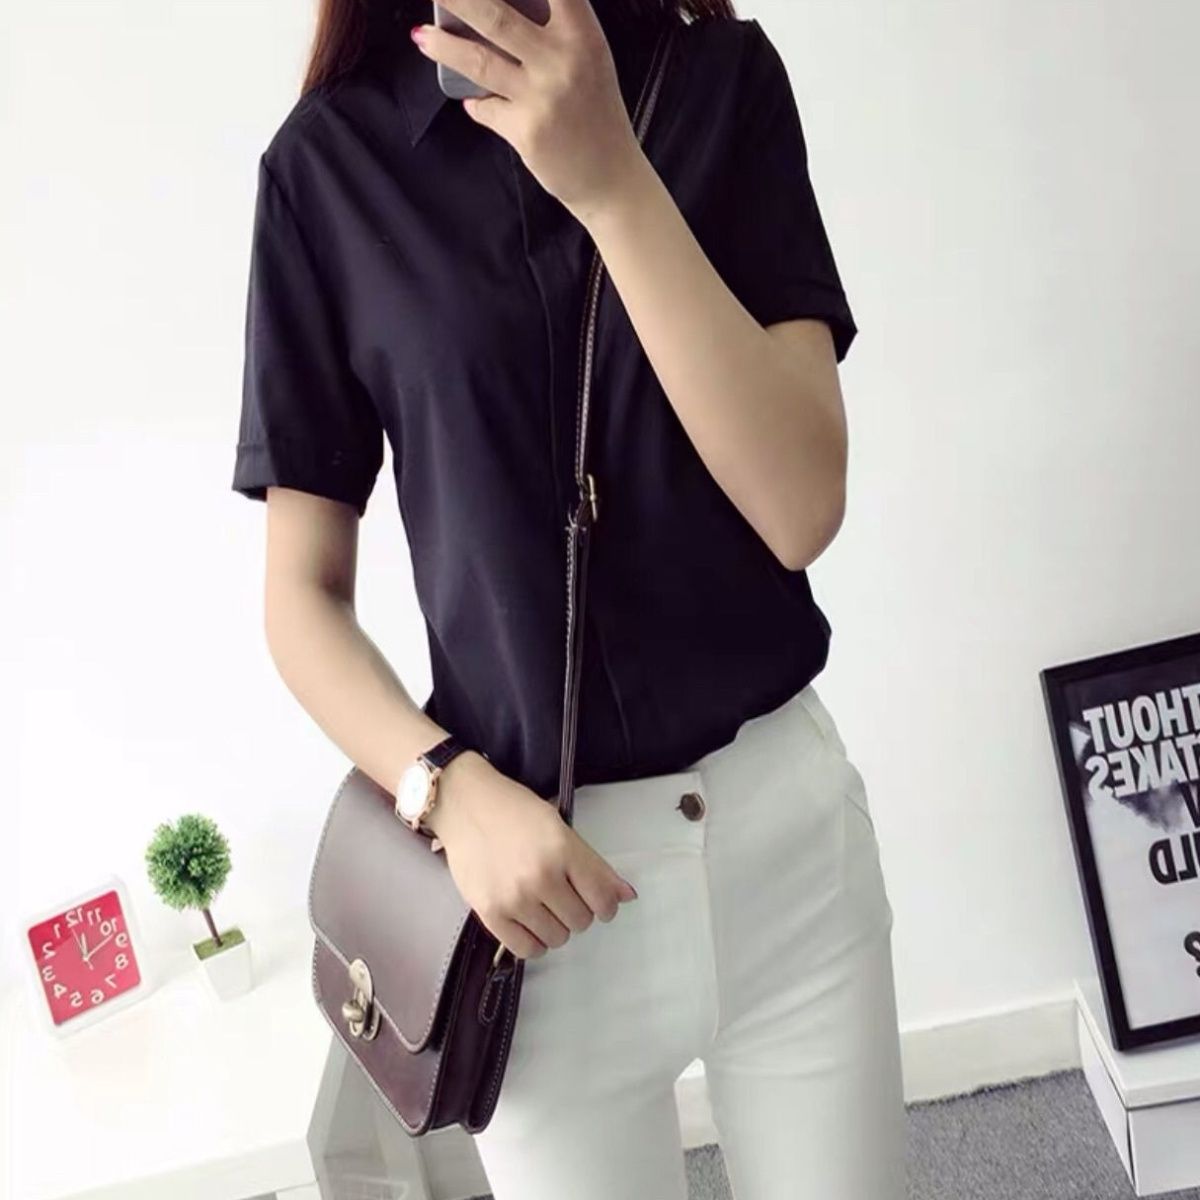 White shirt women's summer short-sleeved business wear Korean version of self-cultivation casual all-match large size tooling chiffon shirt ol top